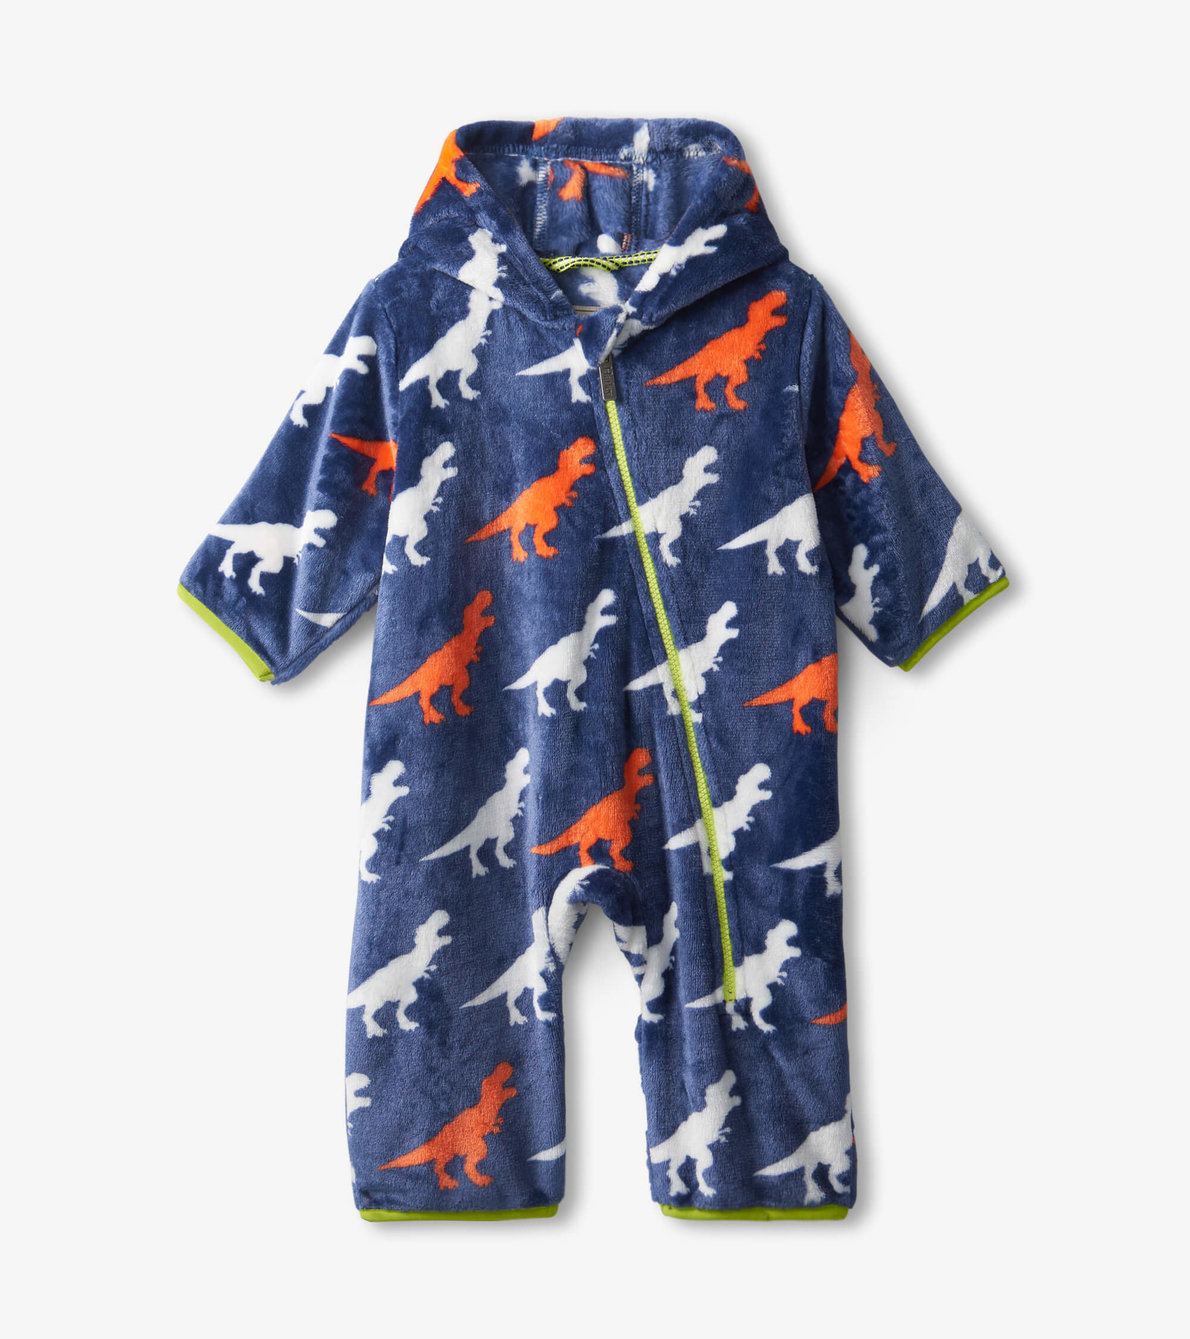 View larger image of Dinosaur Silhouettes Baby Fleece Suit